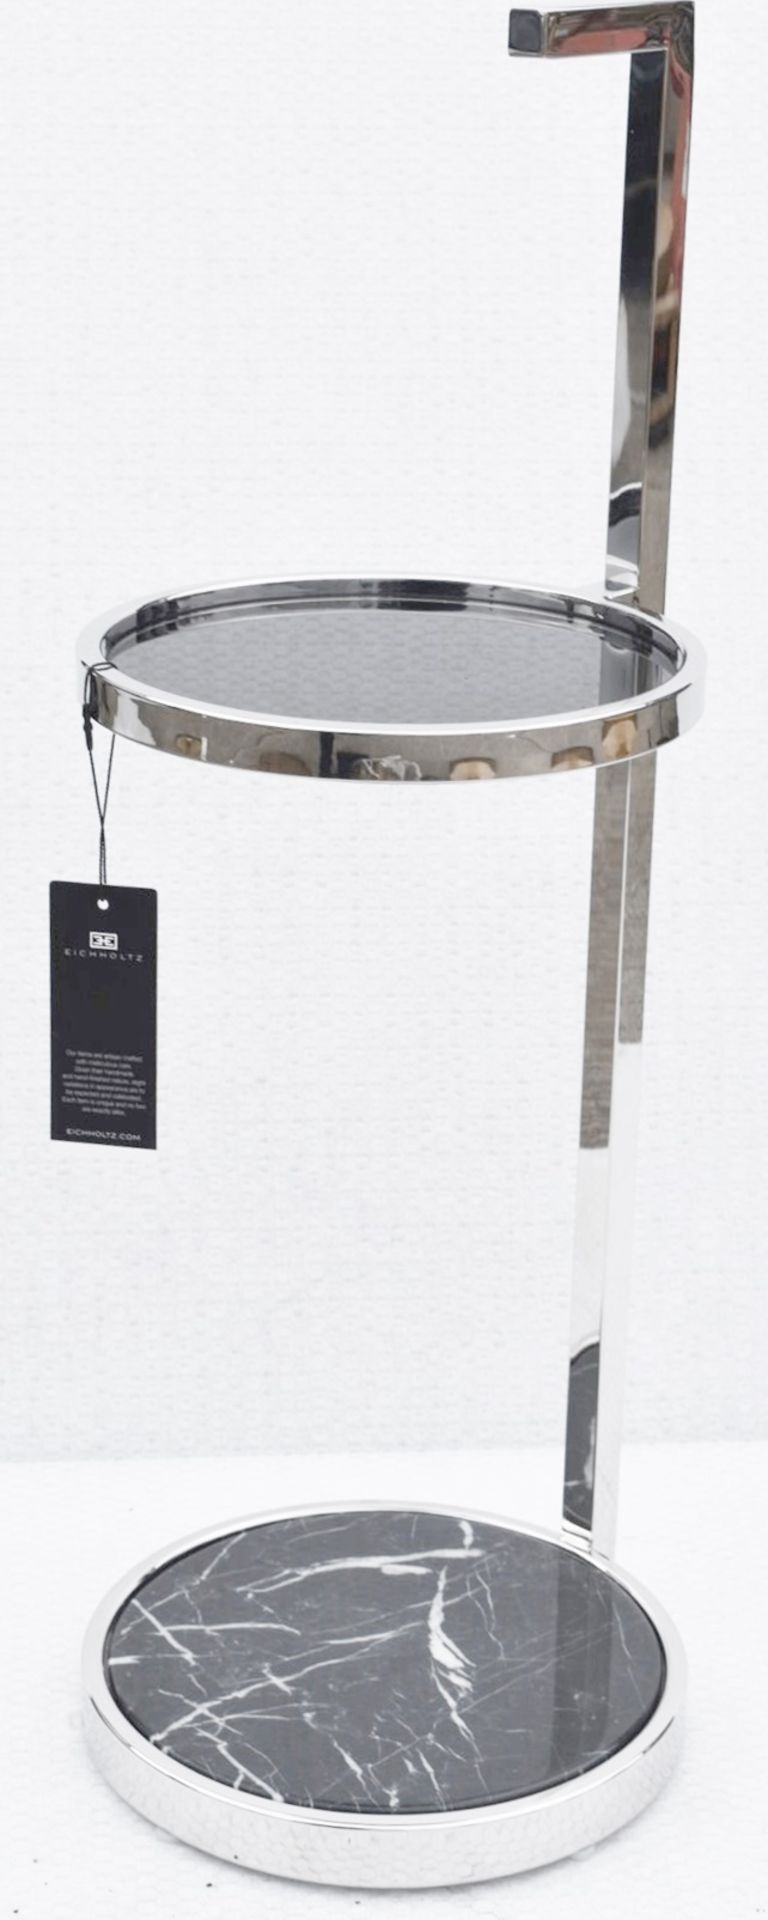 1 x EICHHOLTZ 'Exton' Luxury Side Table in Polished Stainless Steel - RRP £439.00 - Image 3 of 4